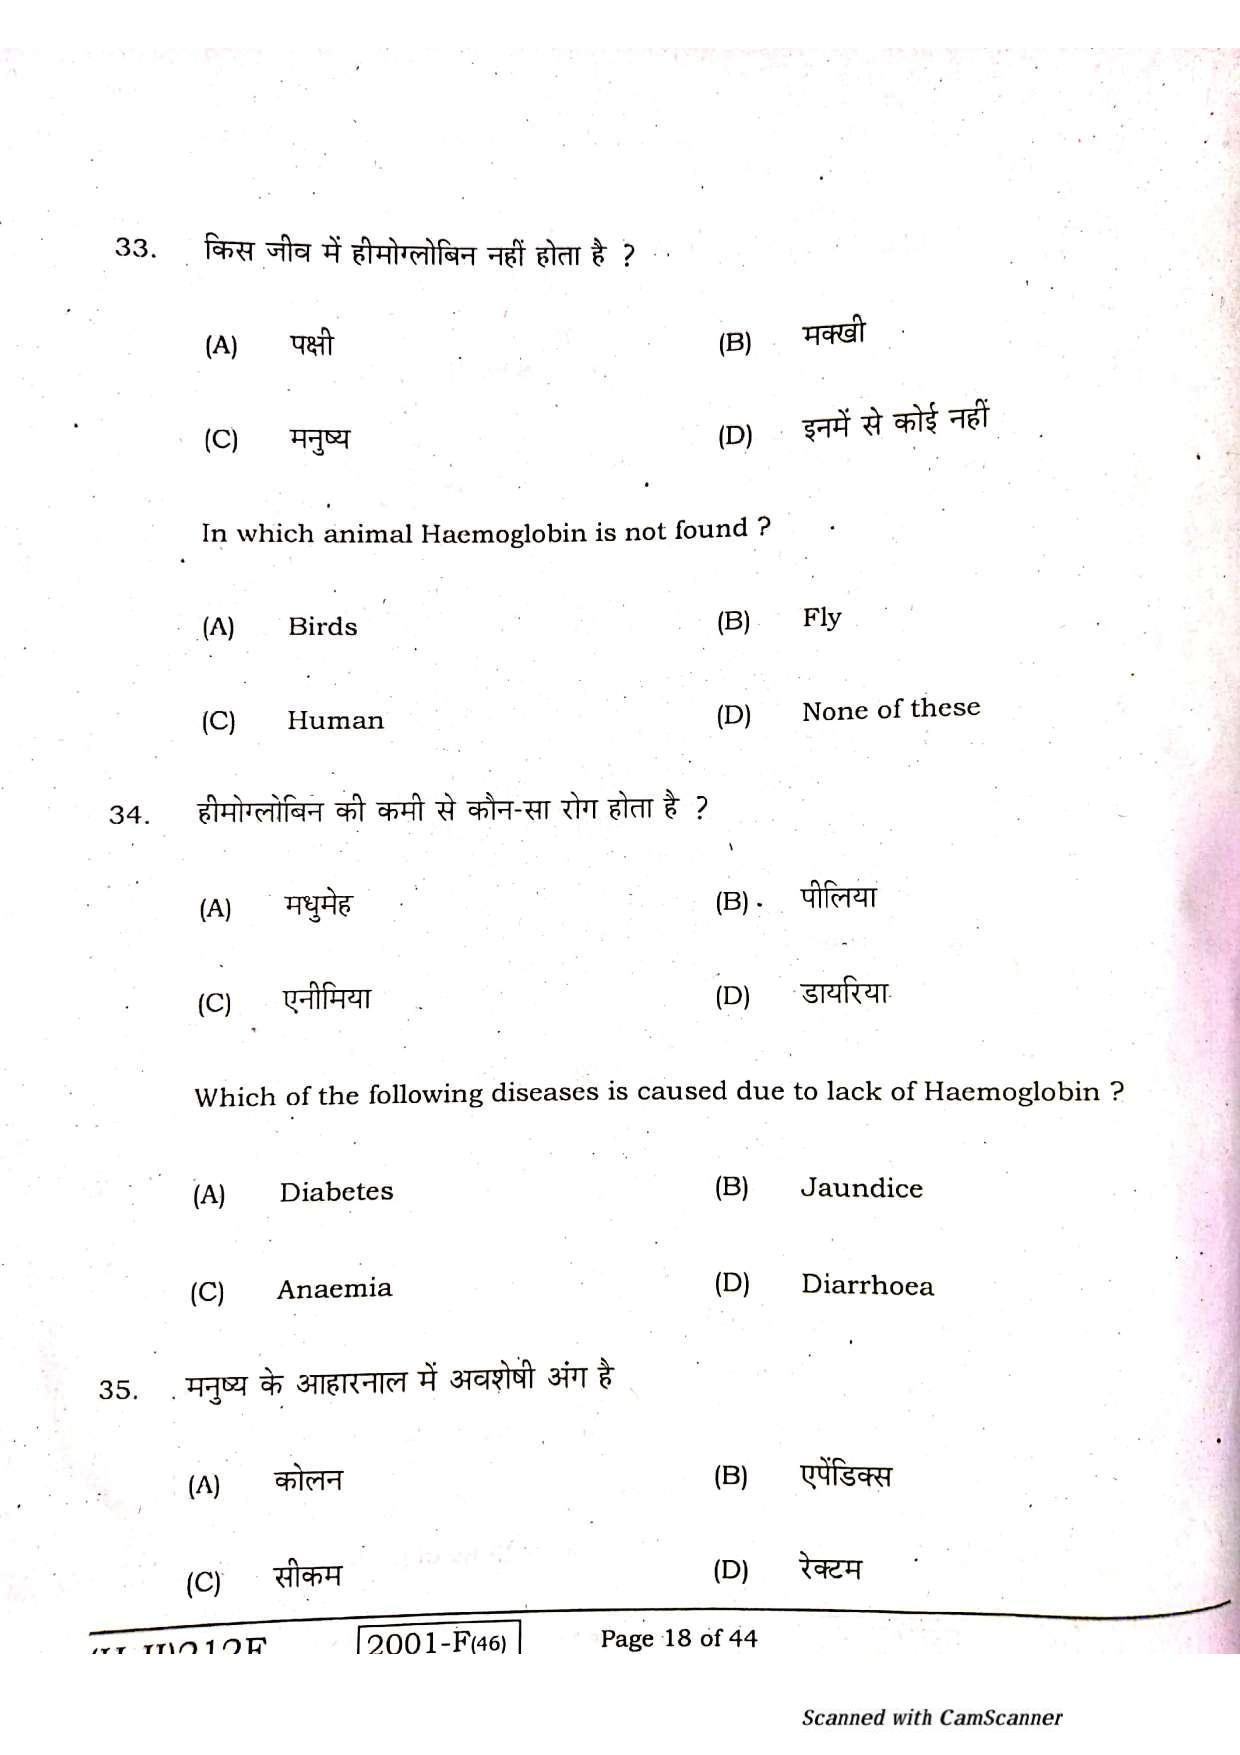 Bihar Board Class 10 Science 2021 (2nd Sitting) Question Paper - Page 16